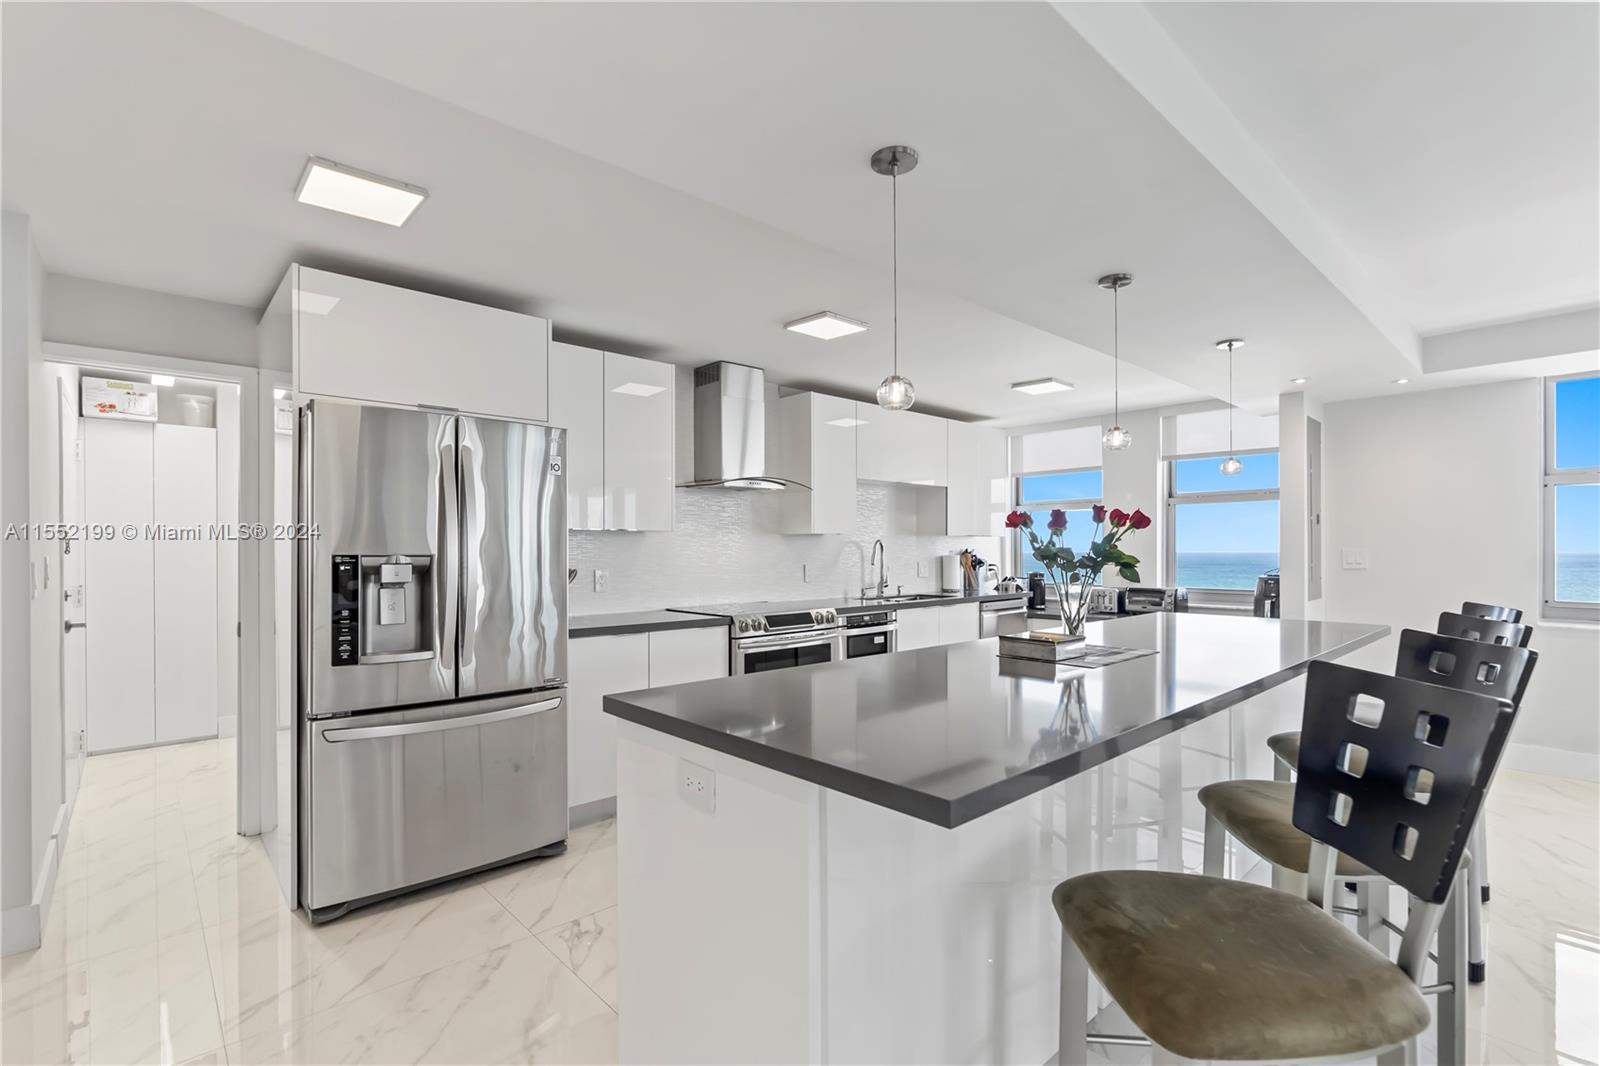 a kitchen with stainless steel appliances granite countertop a refrigerator a sink a stove and island